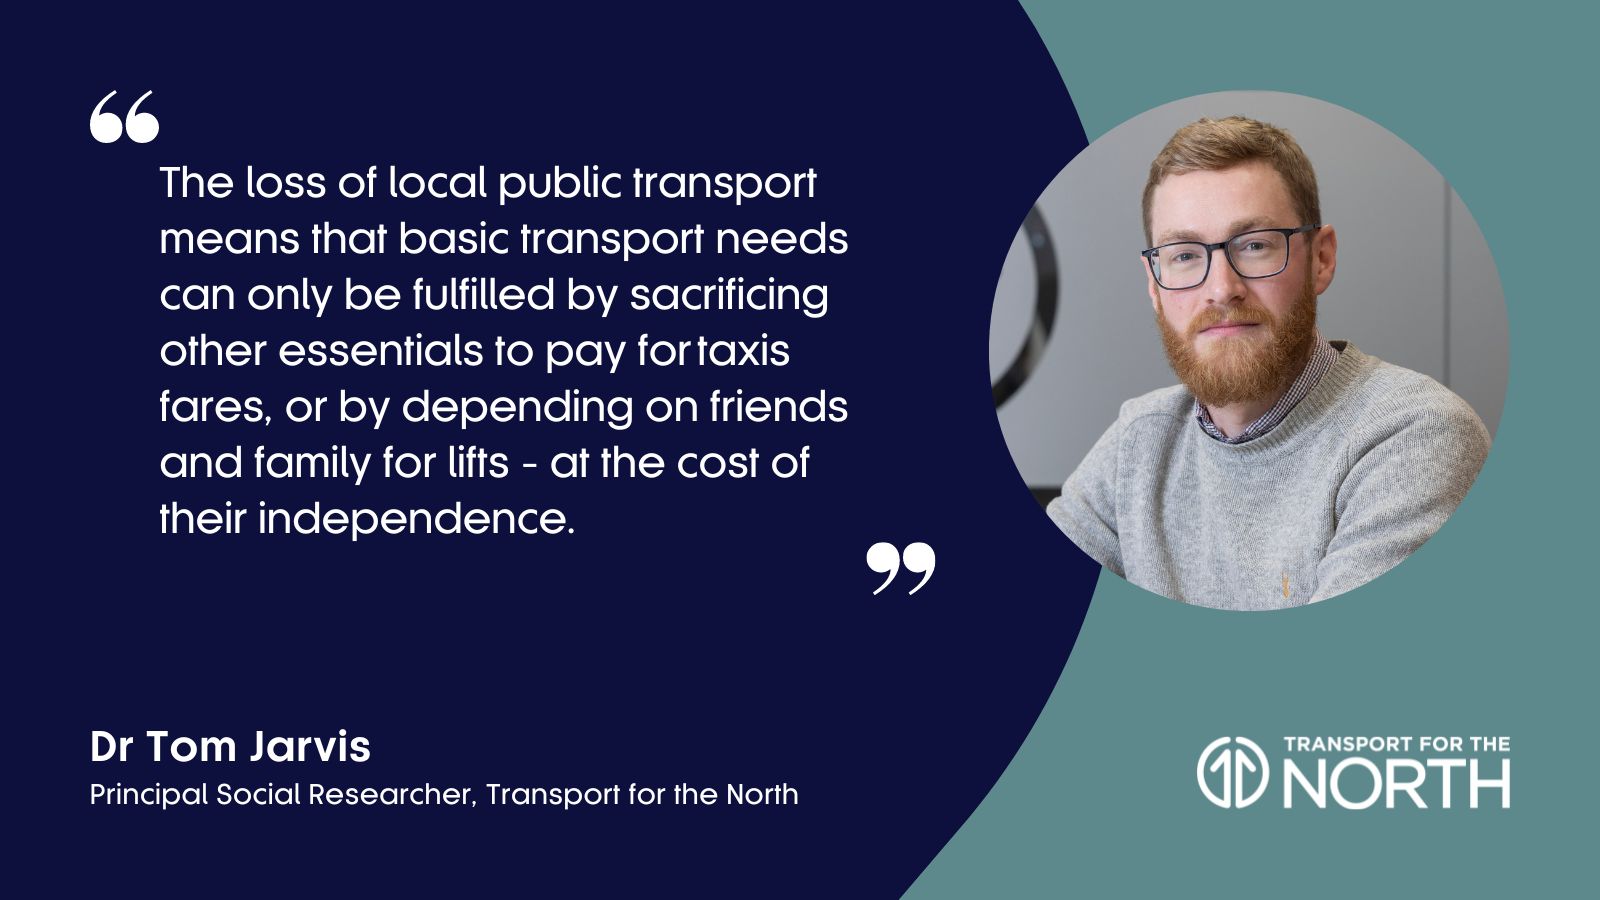 Dr Tom Jarvis comments on the loss of local public transport services in the North